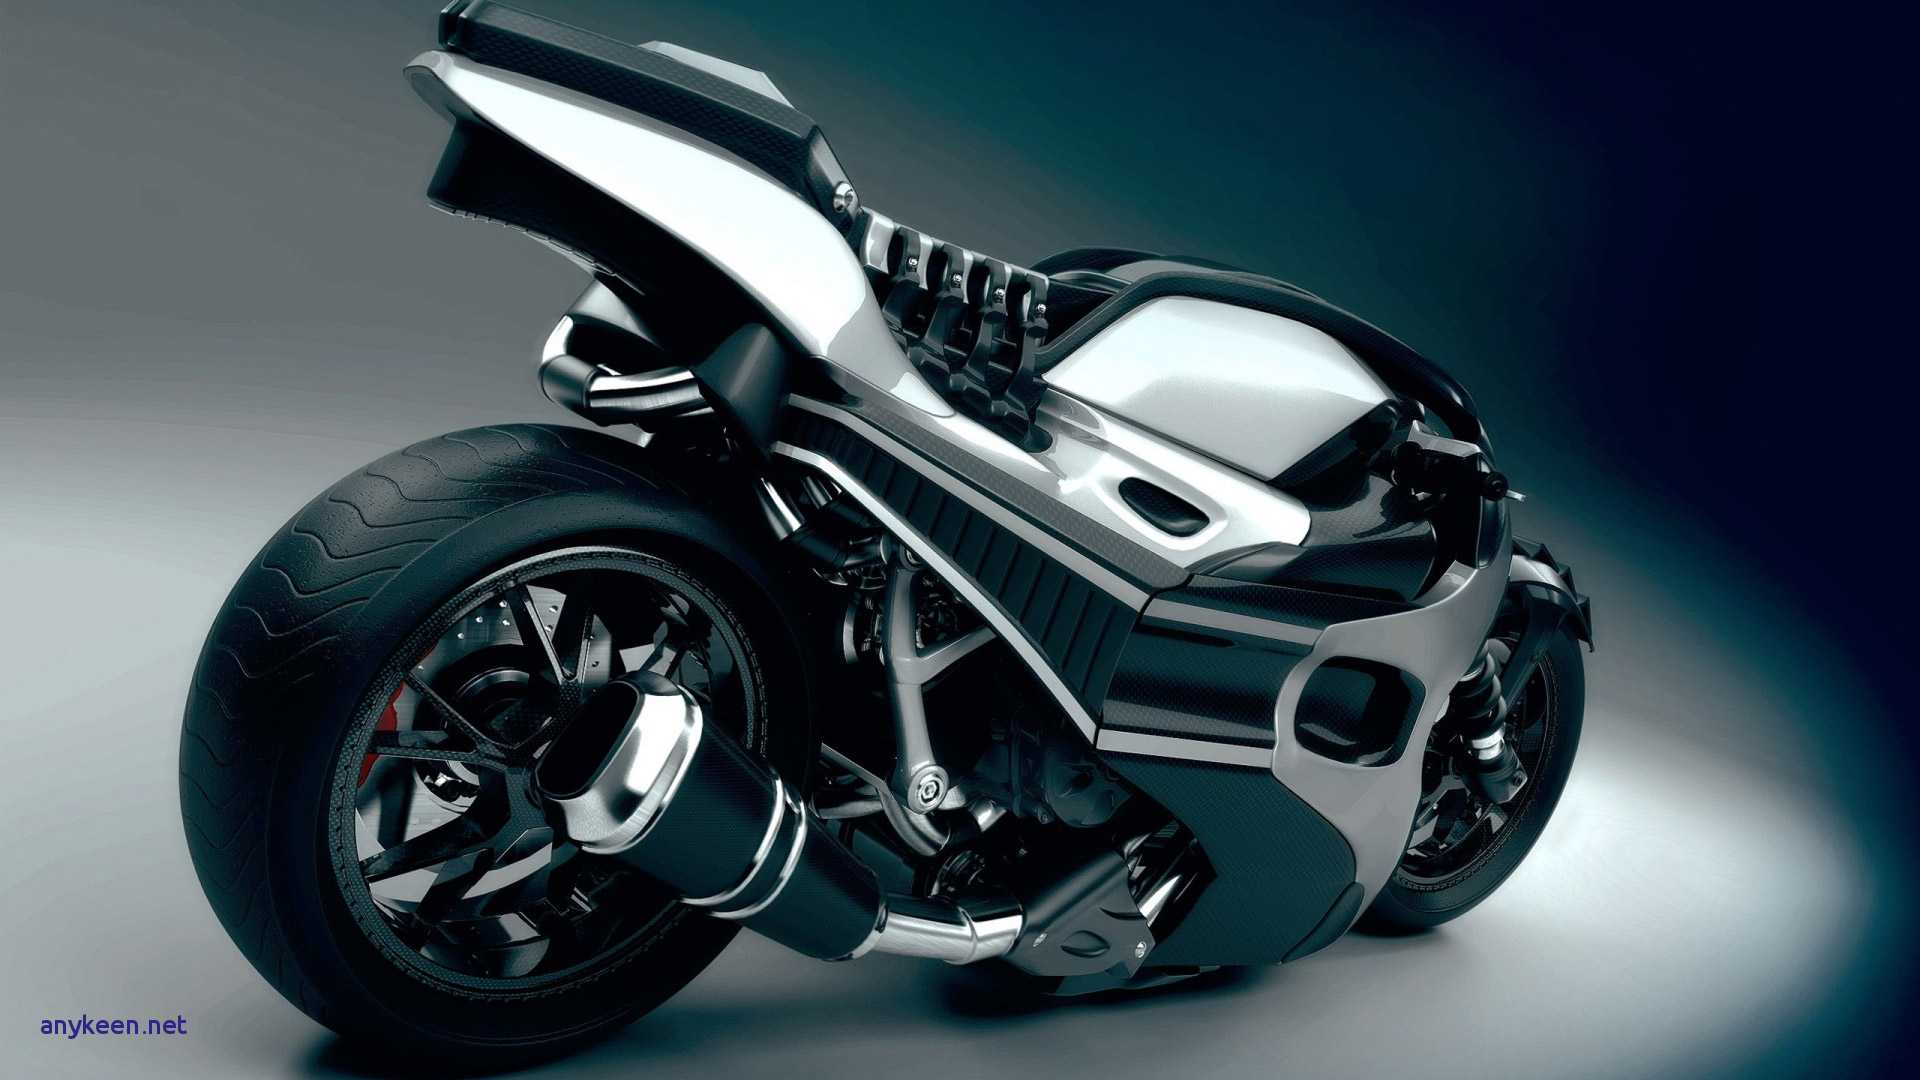 Concept Motorcycles HD Wallpaper Awesome Of Future Cars and Bikes HD